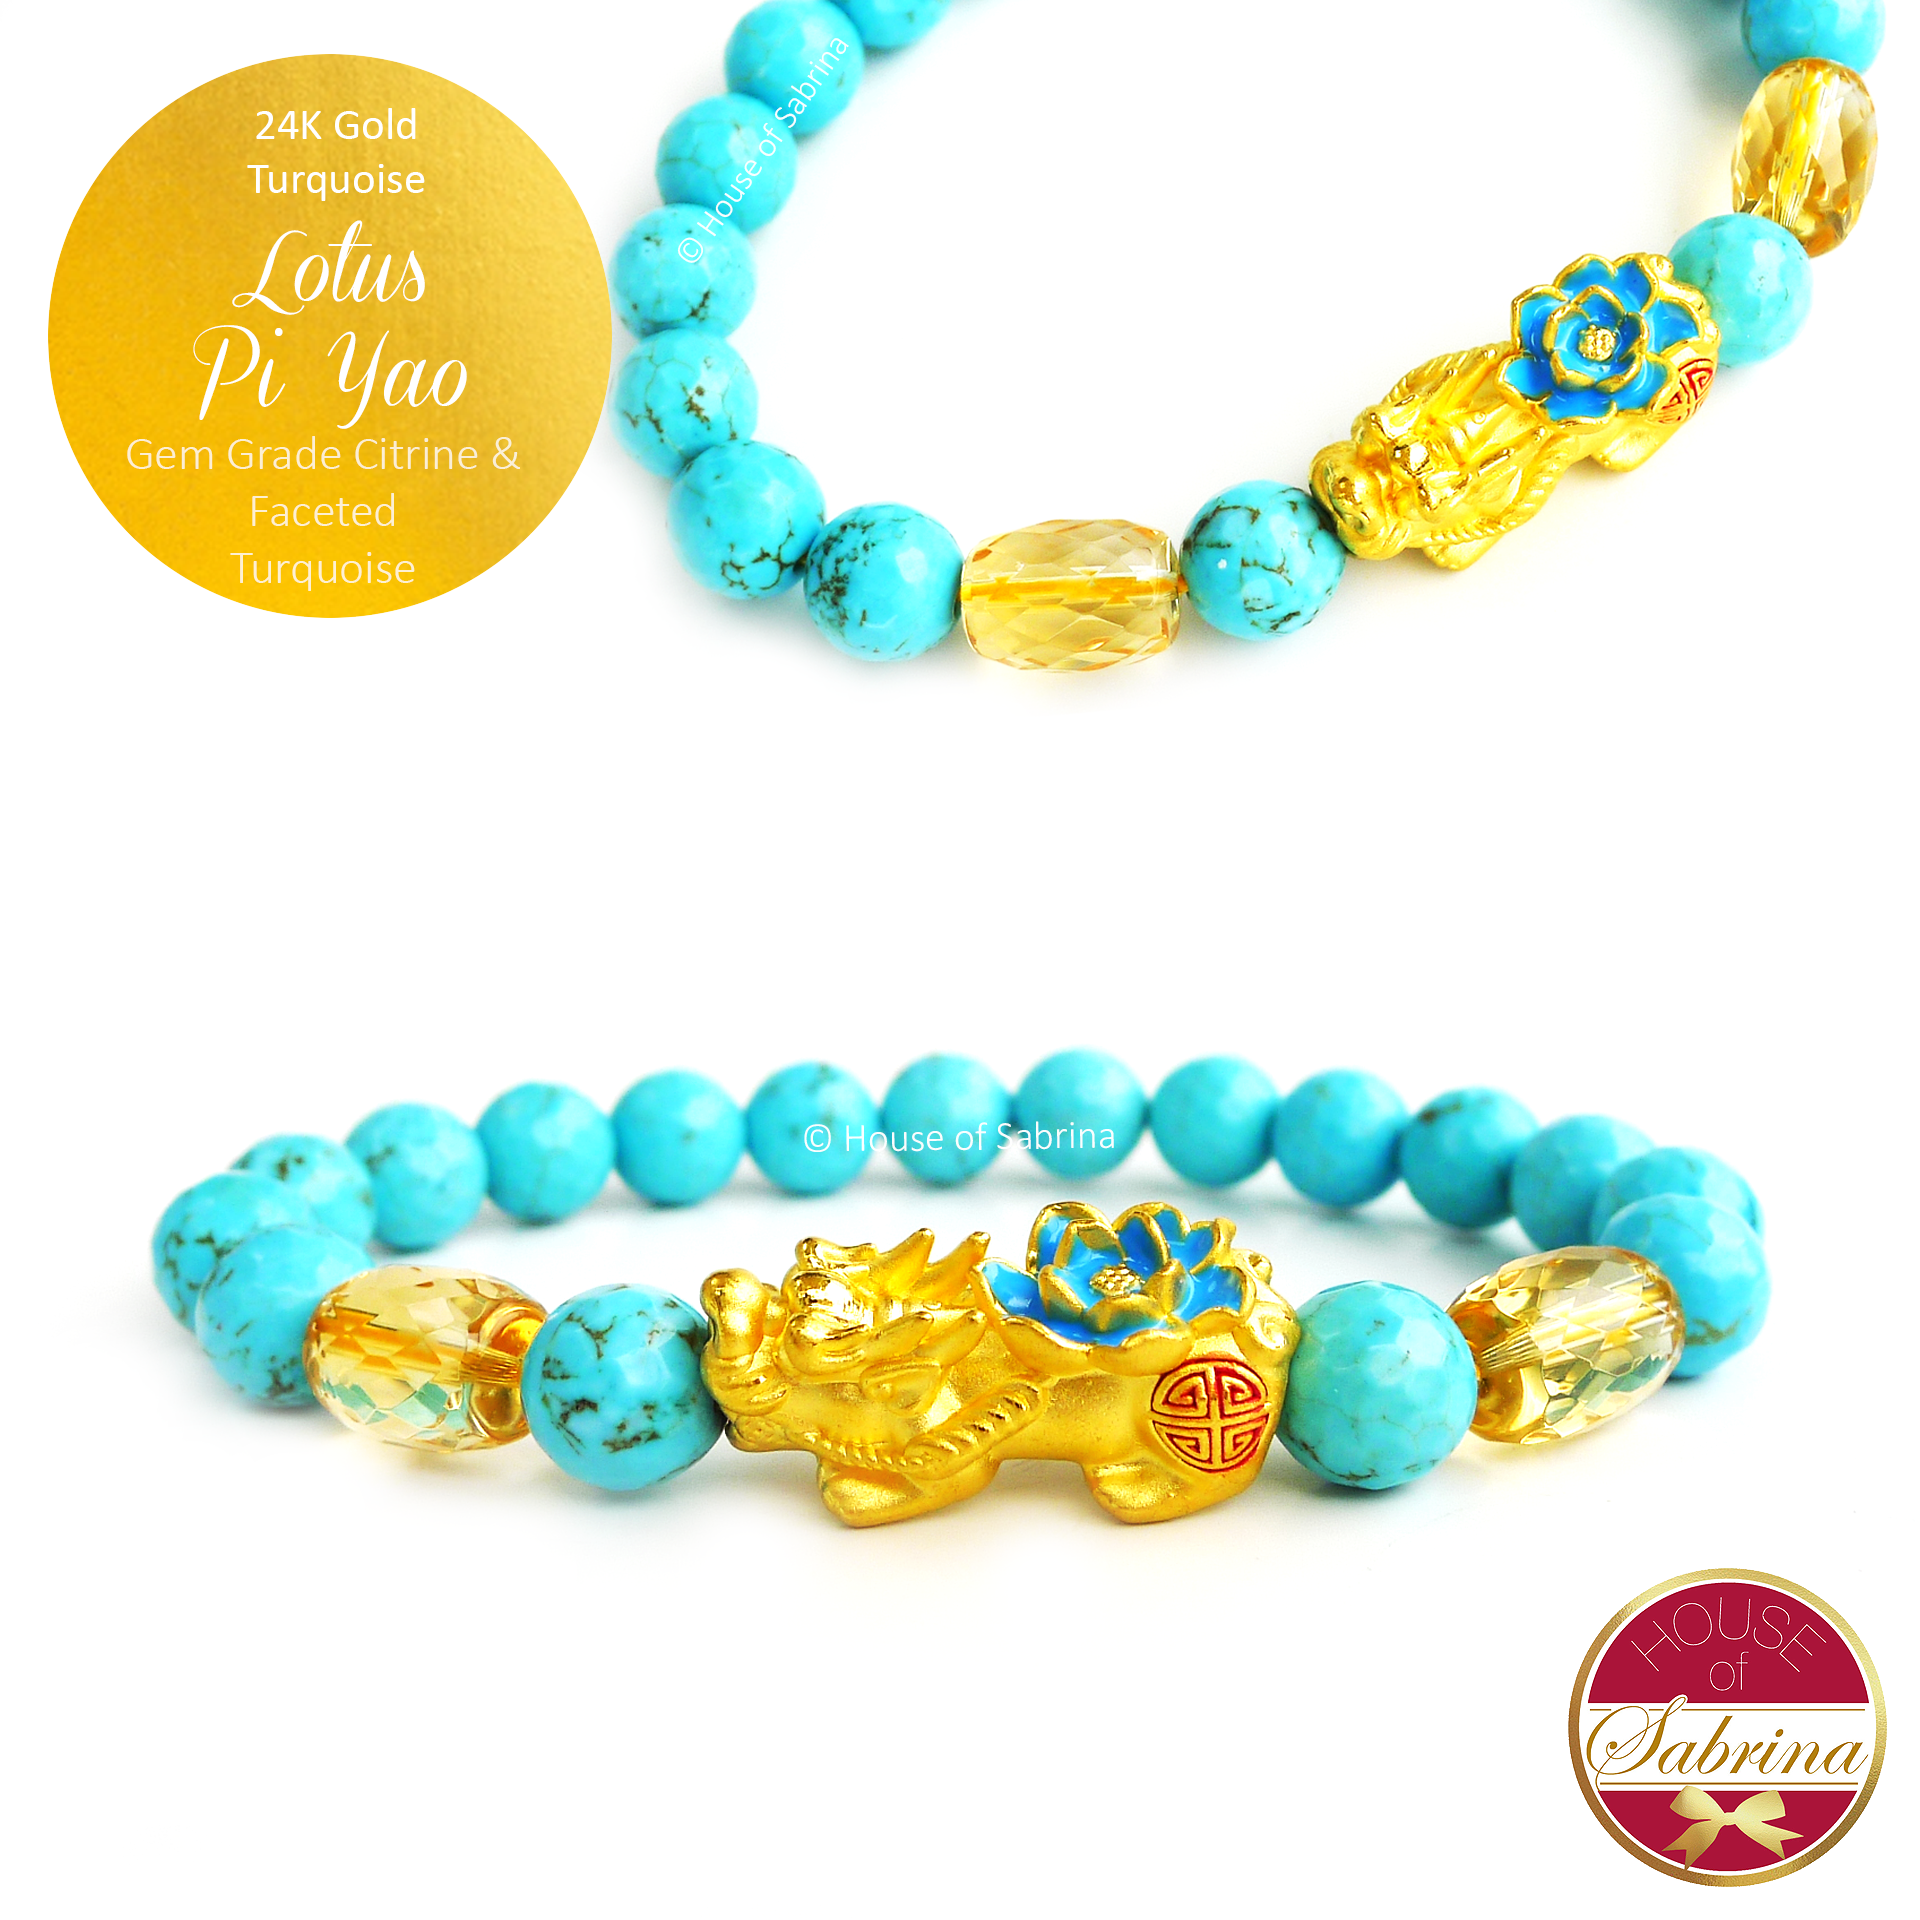 24K Gold Turquoise Pi Yao Lotus with Gem Grade Citrine Accents on Faceted Turquoise Gemstone Bracelet